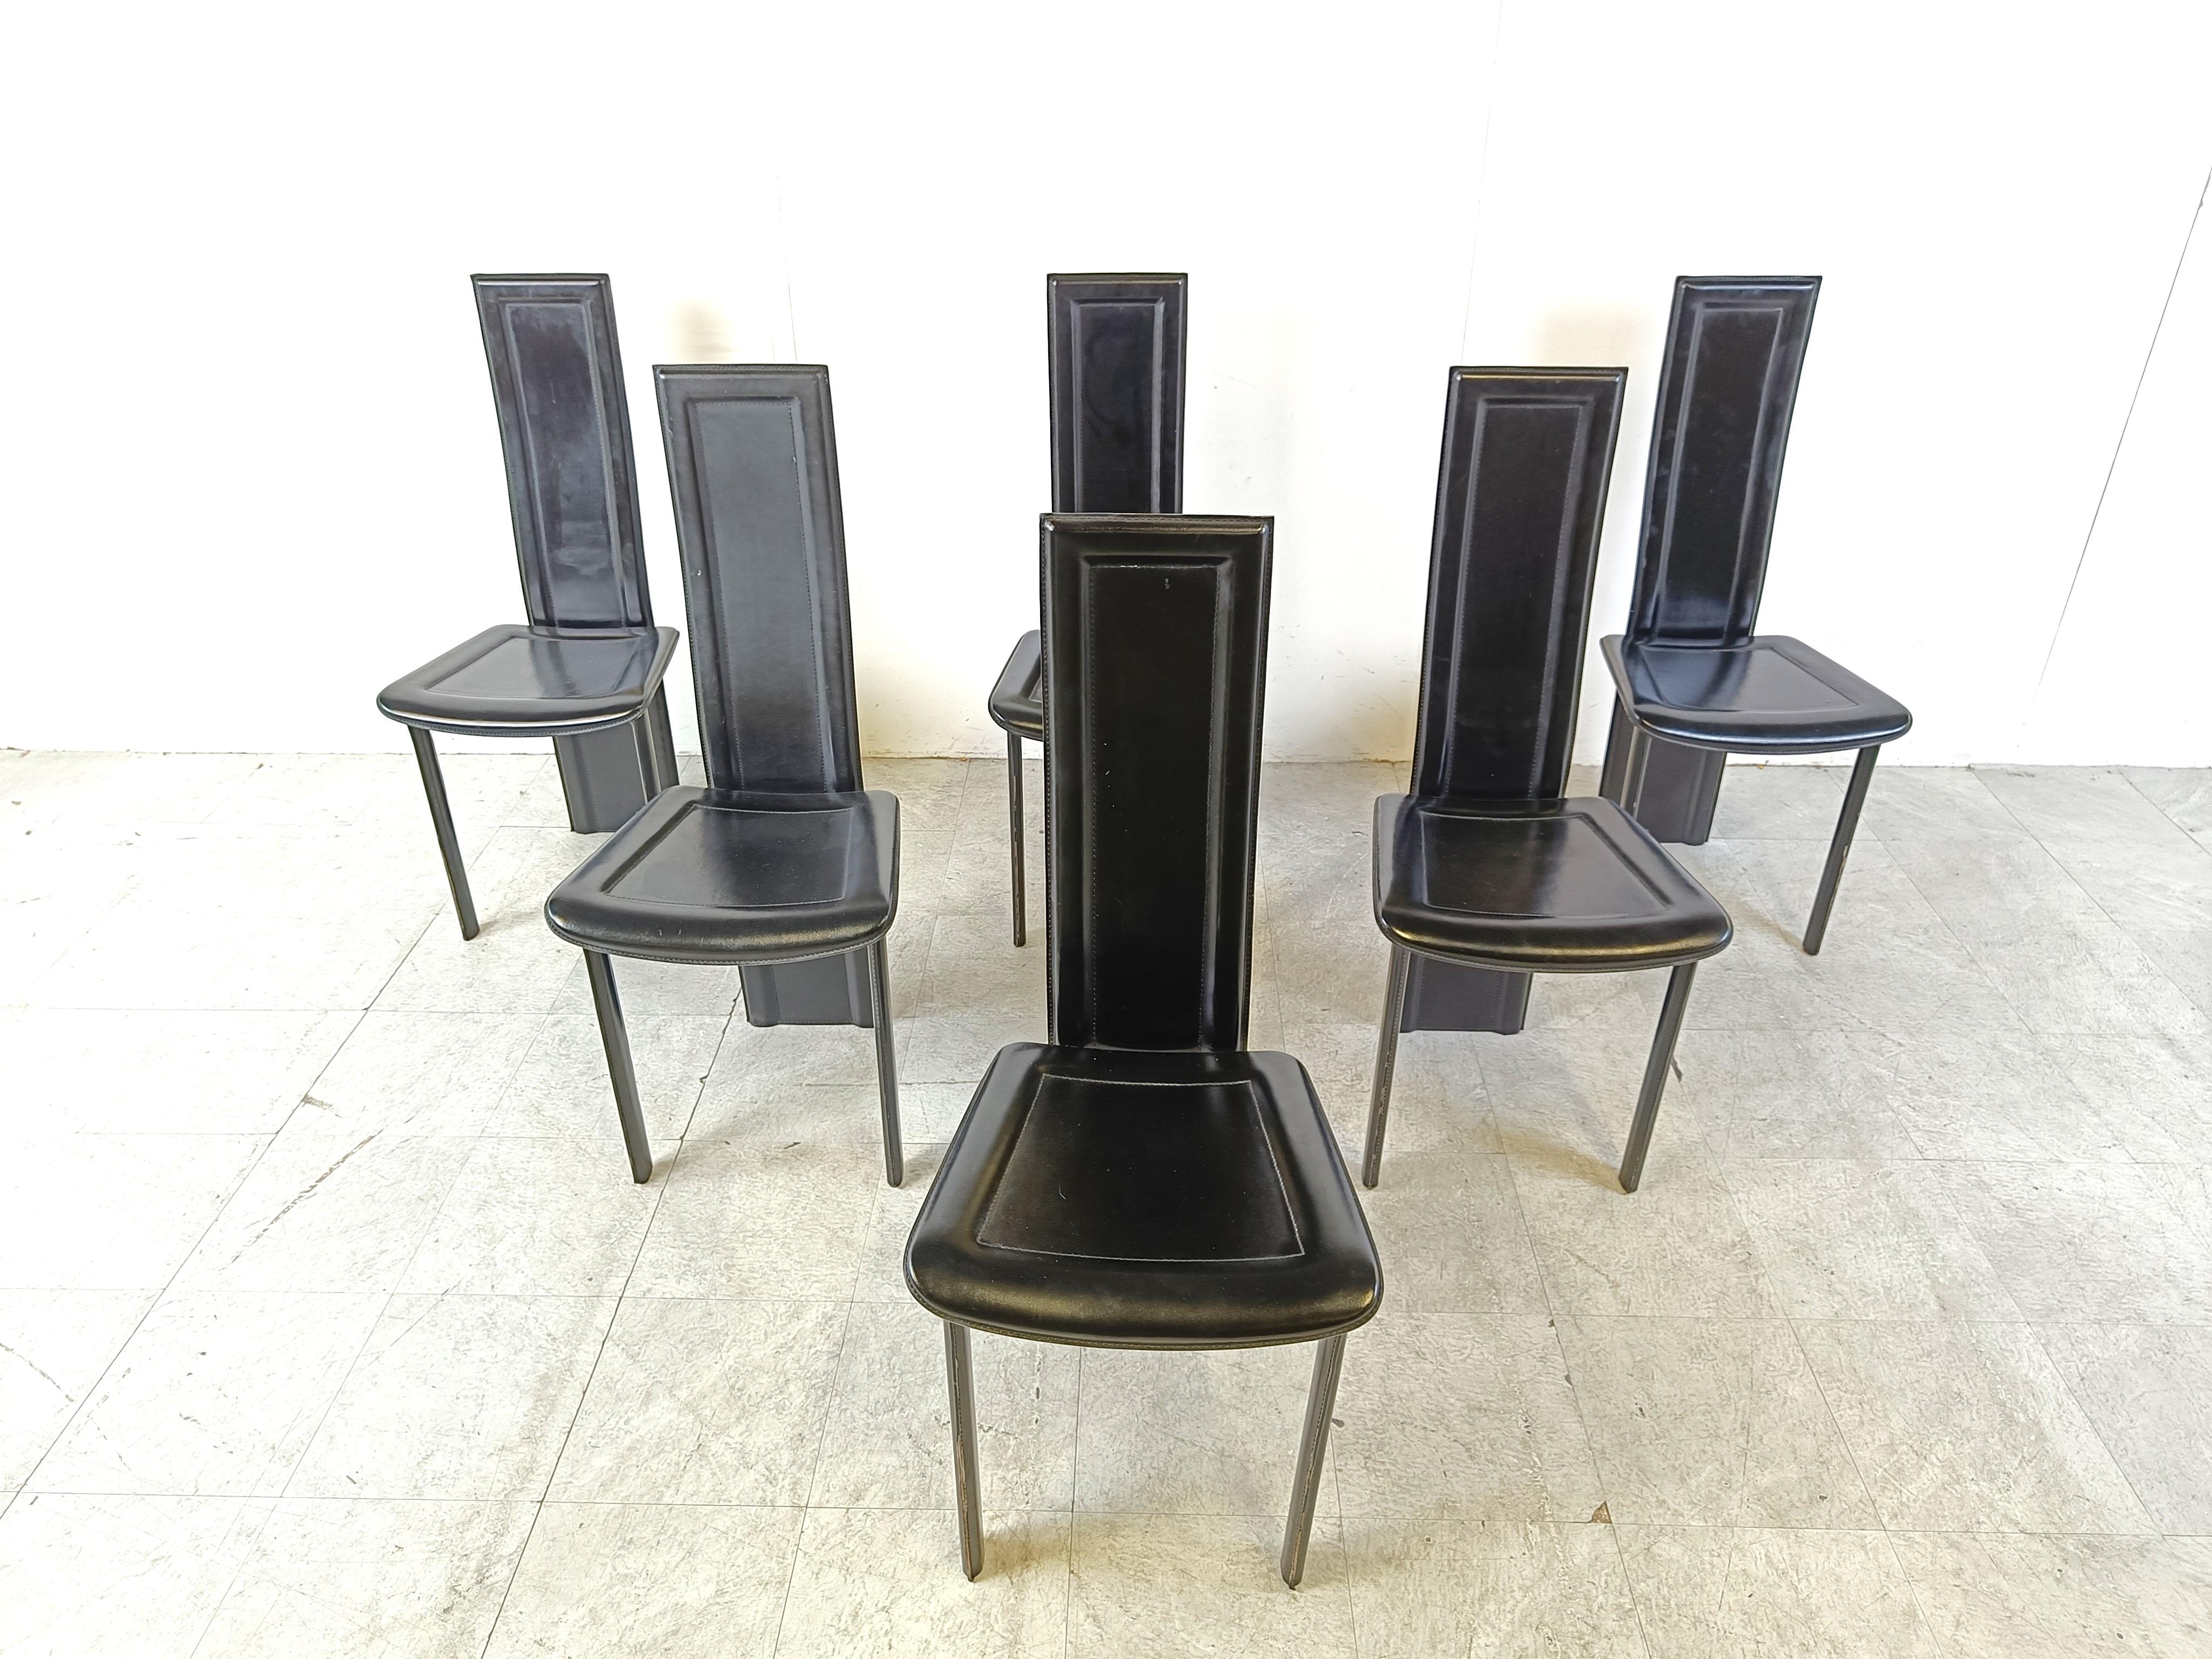 Set of 6 black italian leather high back dining chairs.

beautiful sleek and timeless design.

The chairs are in good condition

1980s - Italy

Dimensions
Height: 107cm
Width 45cm
Depth: 42cm
Seat height: 47cm
Ref.: 600441

*Price is for the set